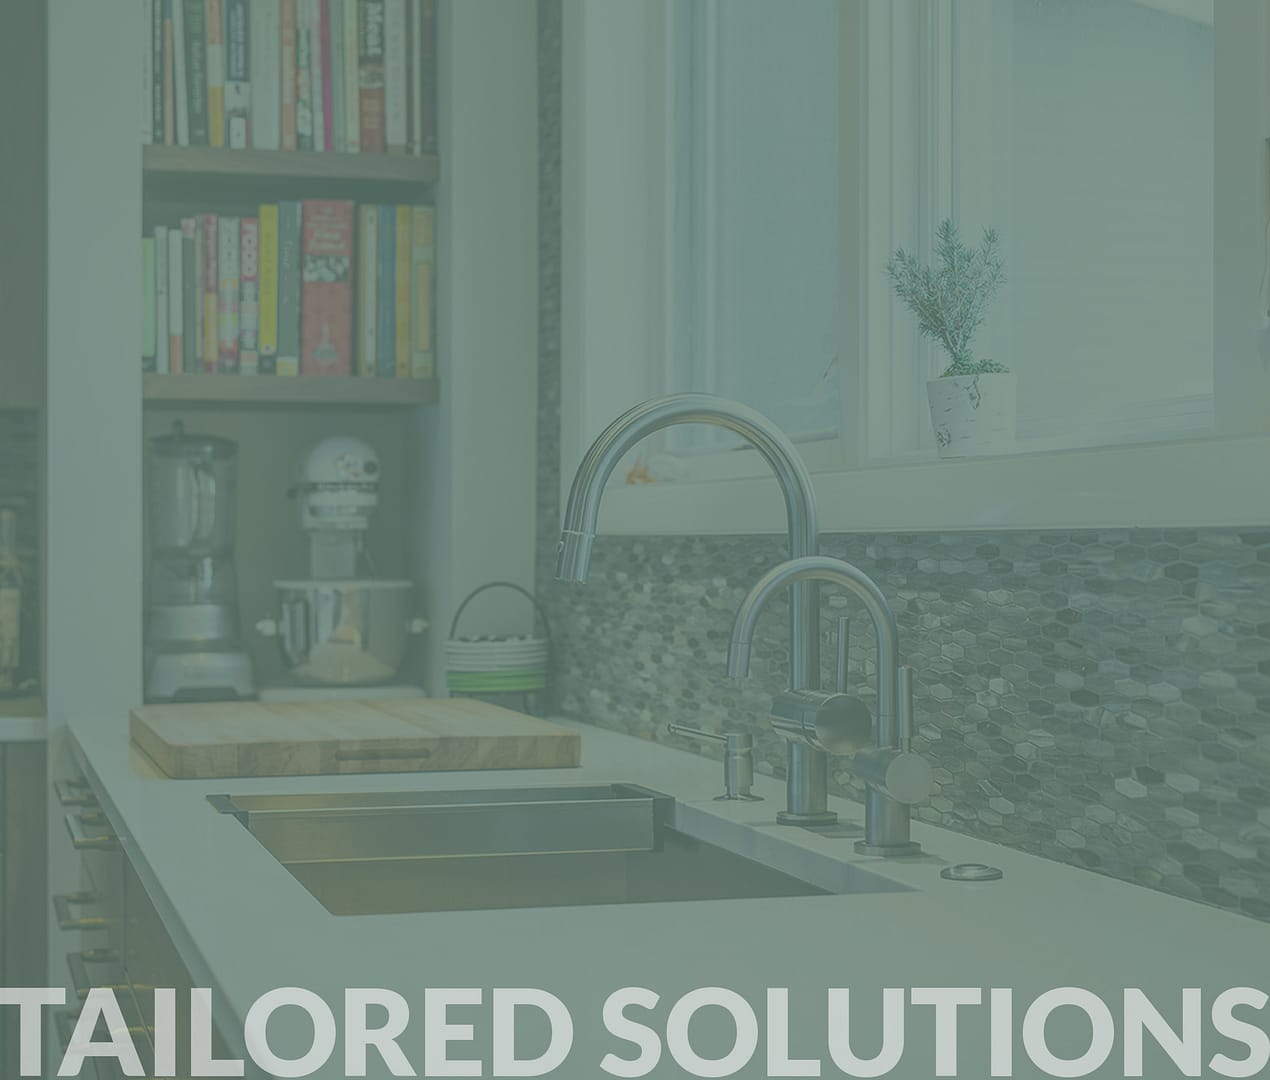 Tailored solutions, including tile for contractors